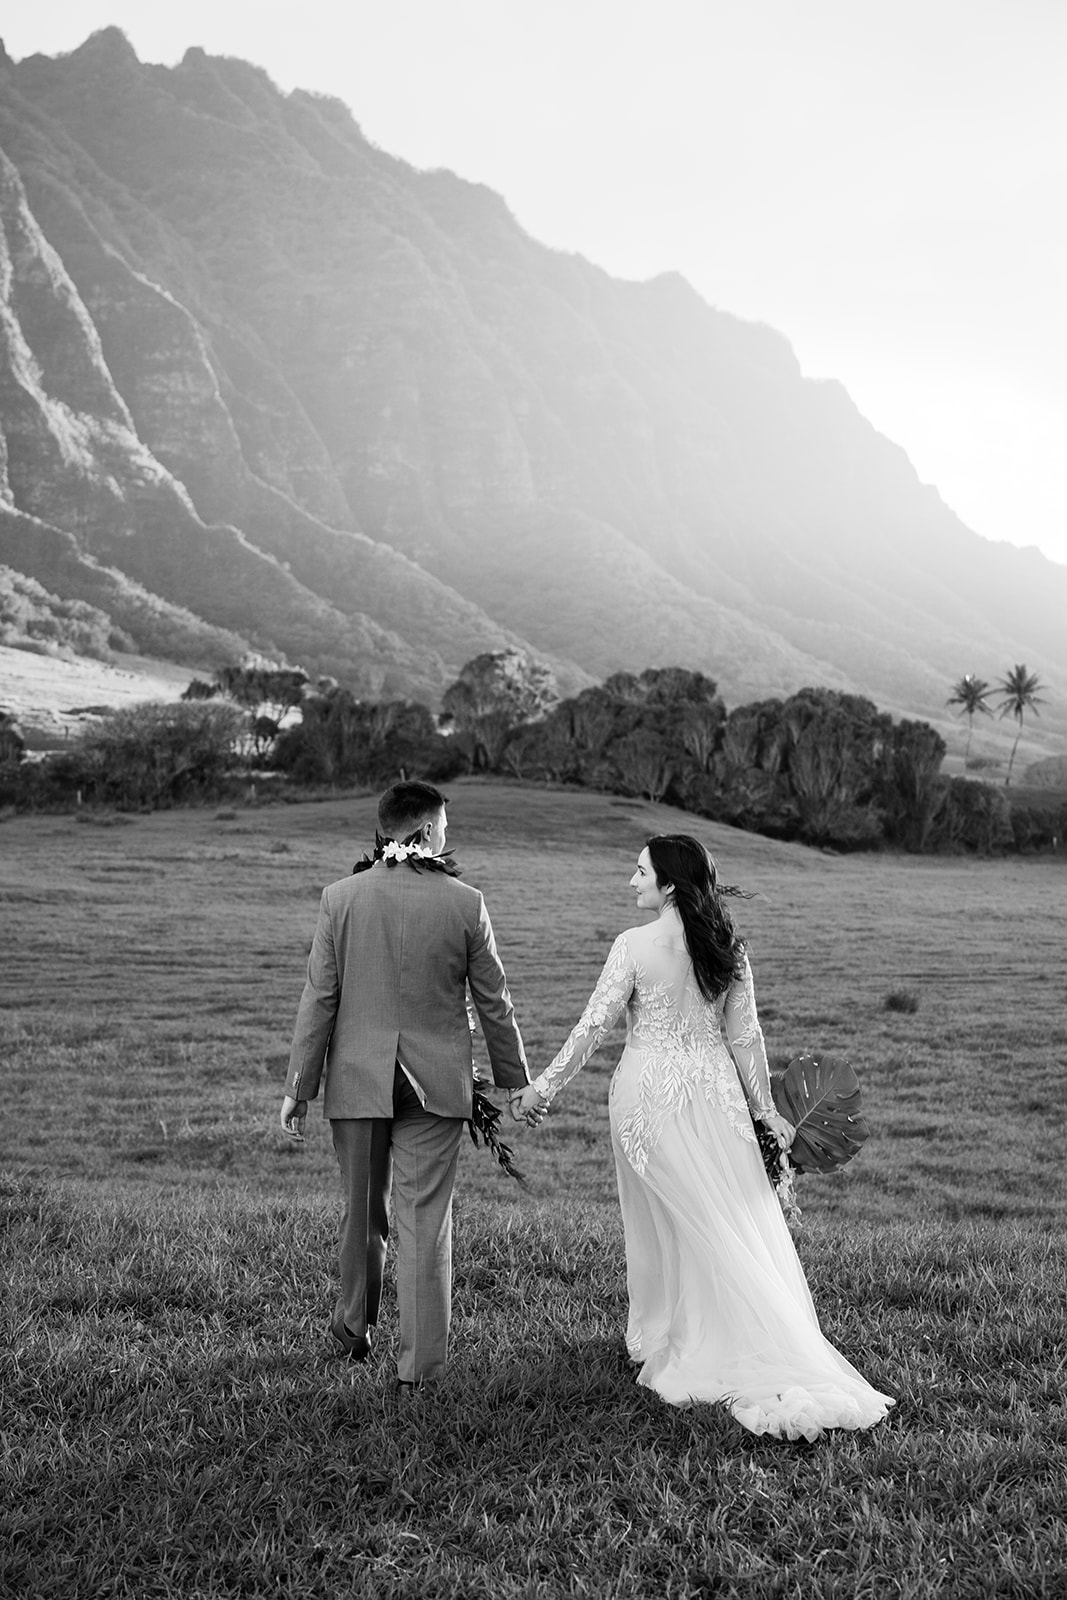 A man and woman holding hands in a field with mountains in the background.